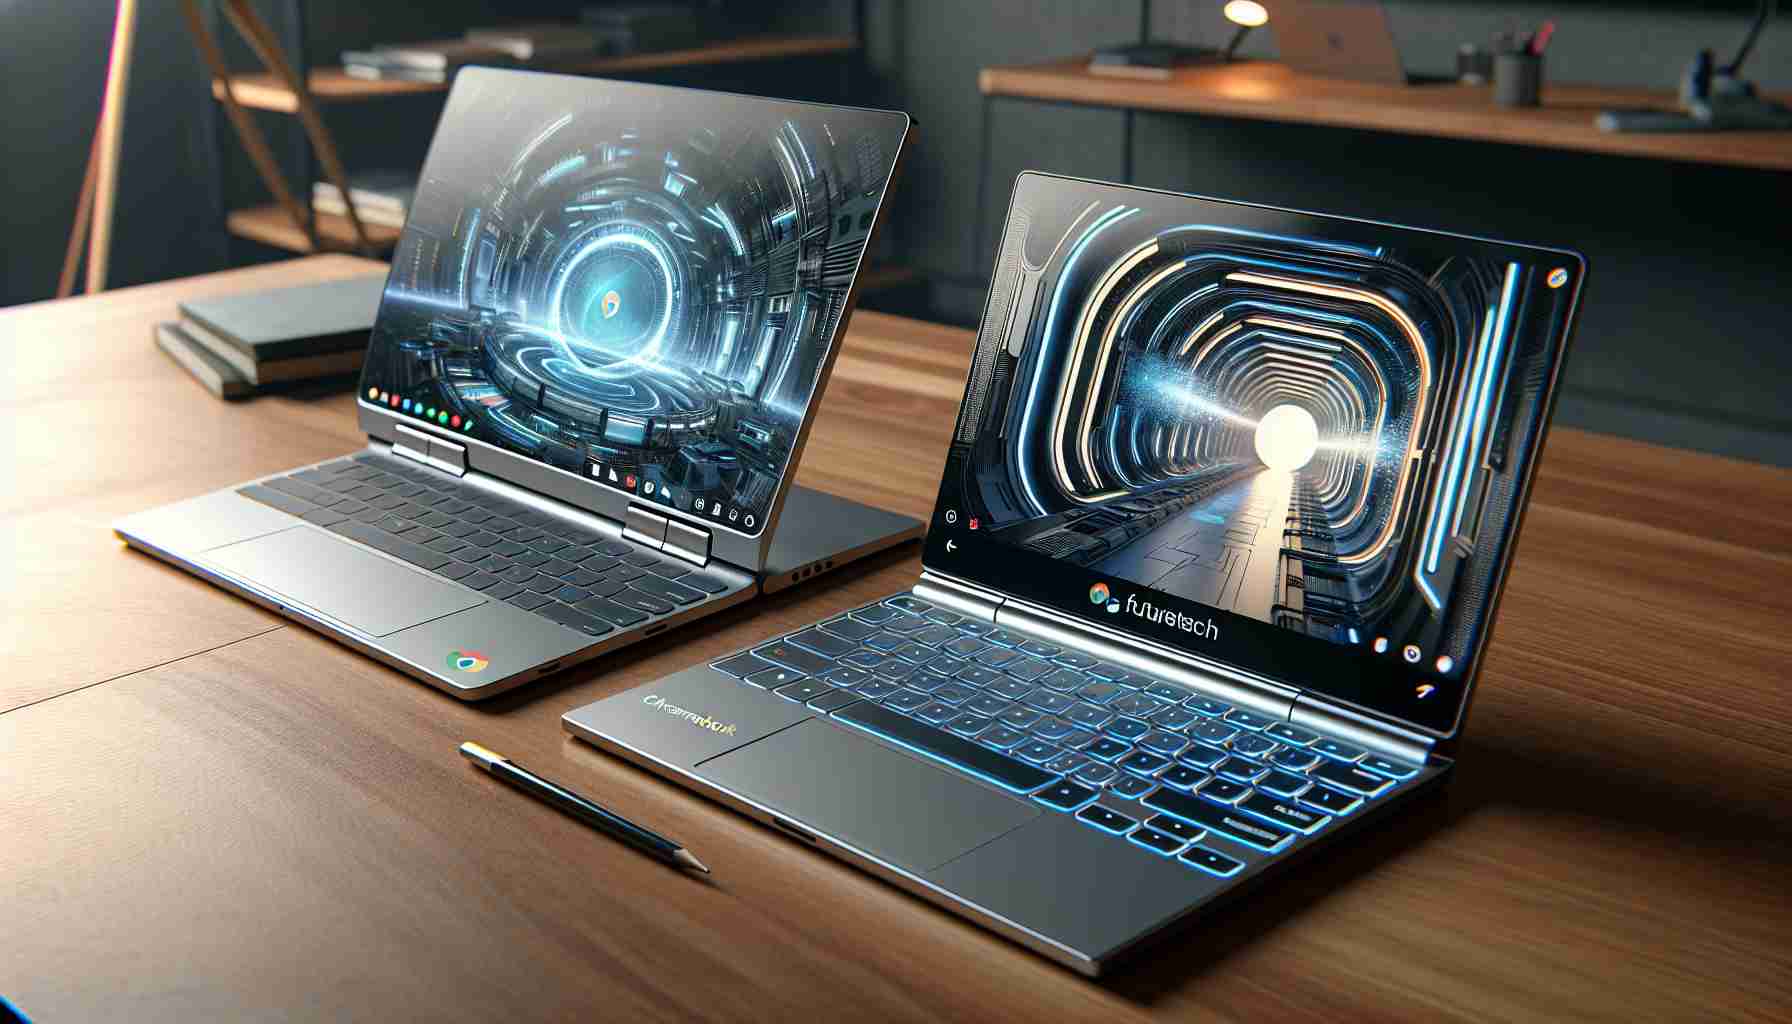 Create a high-definition, realistic image of two revolutionary laptops. One is the widely-popular Chromebook Plus, known for its sleek silver design, chiclet-style keyboard, and minimalistic yet functional aesthetics. The second is a concept laptop from the futuristic brand FutureTech, imagined with unique features such as a transparent, touch-sensitive display, holographic keyboard, and a slim, ultra-lightweight black titanium body. Both laptops are open and turned on, showing their visually different operating systems. They are placed next to each other on a stylish, modern wooden desk.